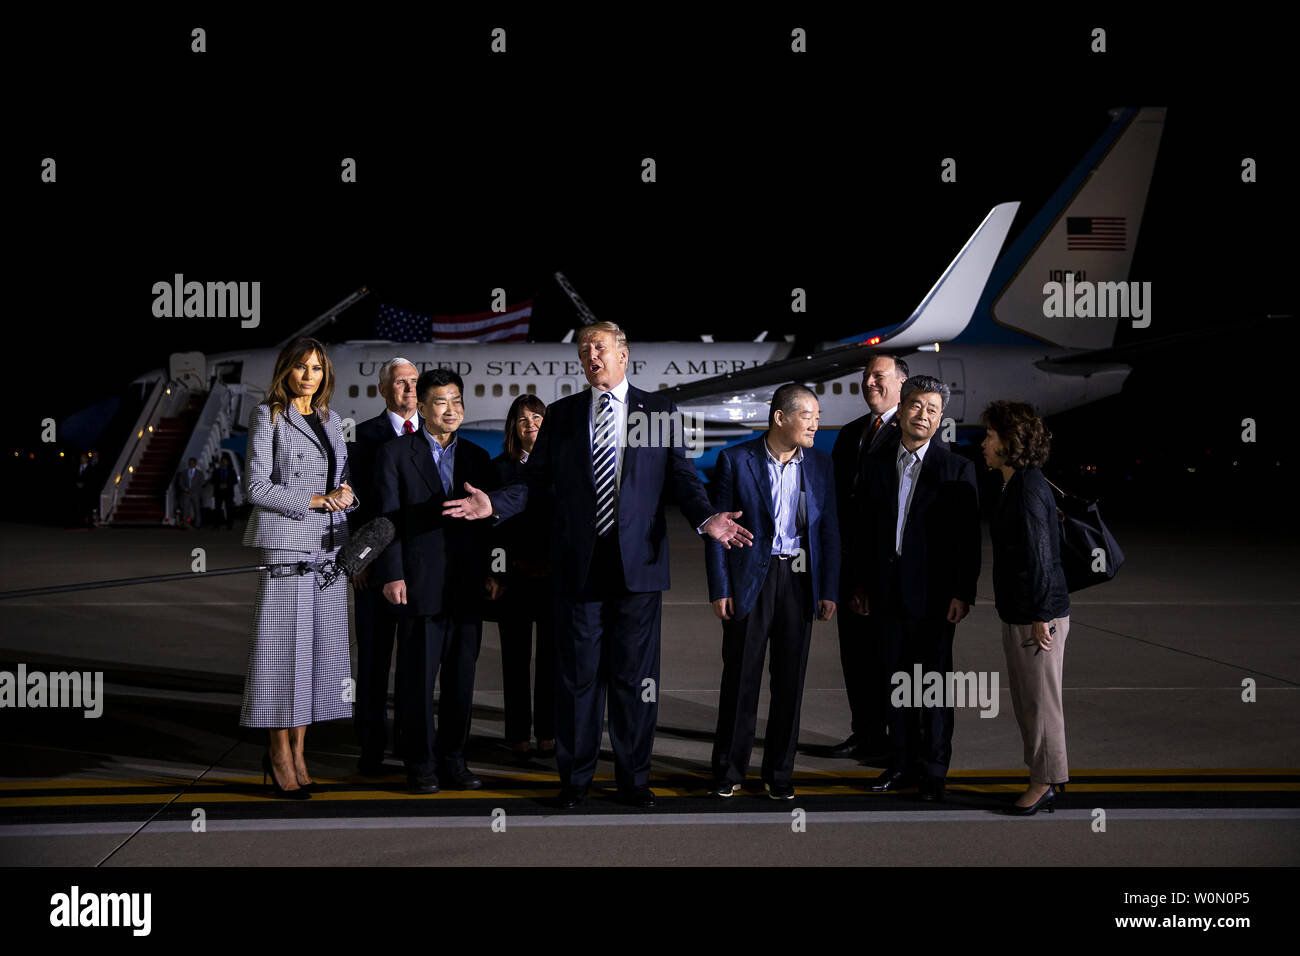 President Donald Trump walks on the tarmac with the three American citizens Kim Hak-Song, Kim Dong-Chul, and Kim Sang-Duk, who were detained in North Korea, at Joint Base Andrews in Maryland on May 10, 2018. Photo by Al Drago/UPI Stock Photo